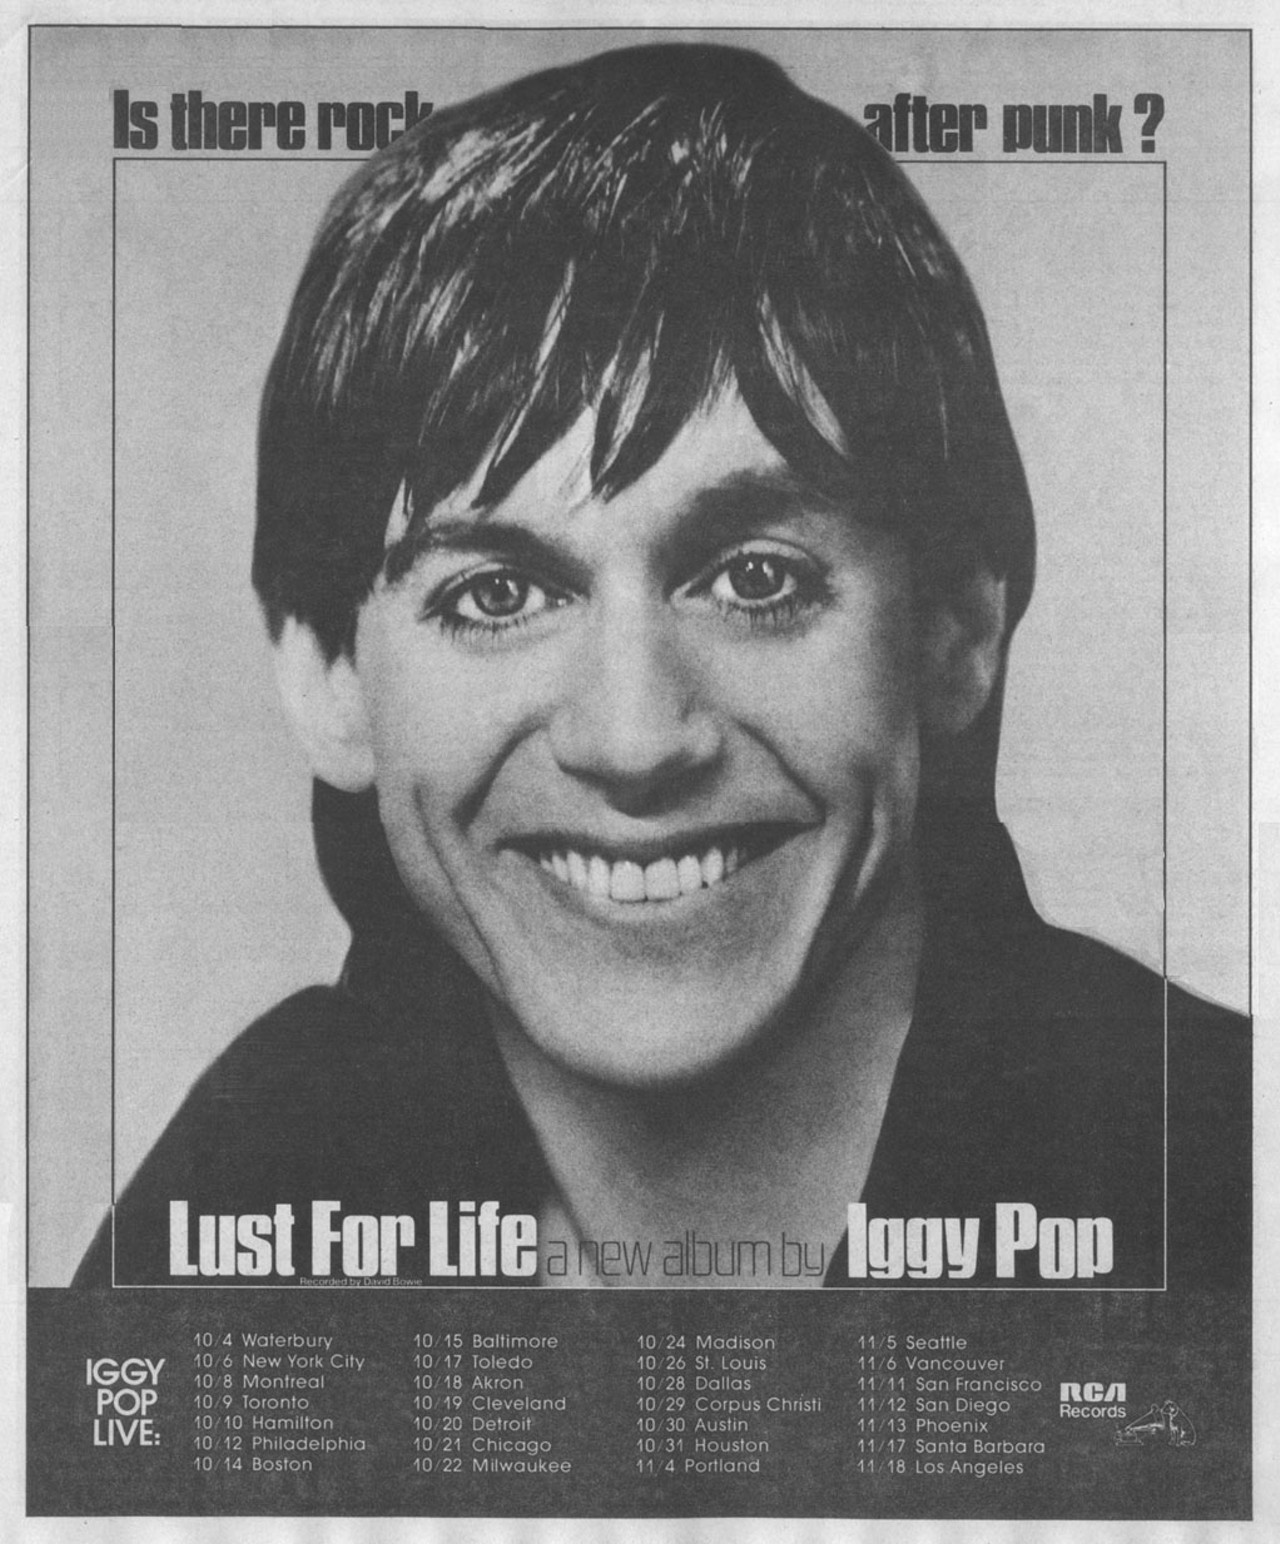 4. &#147;The Passenger&#148;	
Talk about a sing-along opportunity! If Iggy&#146;s voice is tired, he might consider playing this and just letting the audience take over.
(Photo: original advertisement for the &#145;Lust for Life&#146; tour)